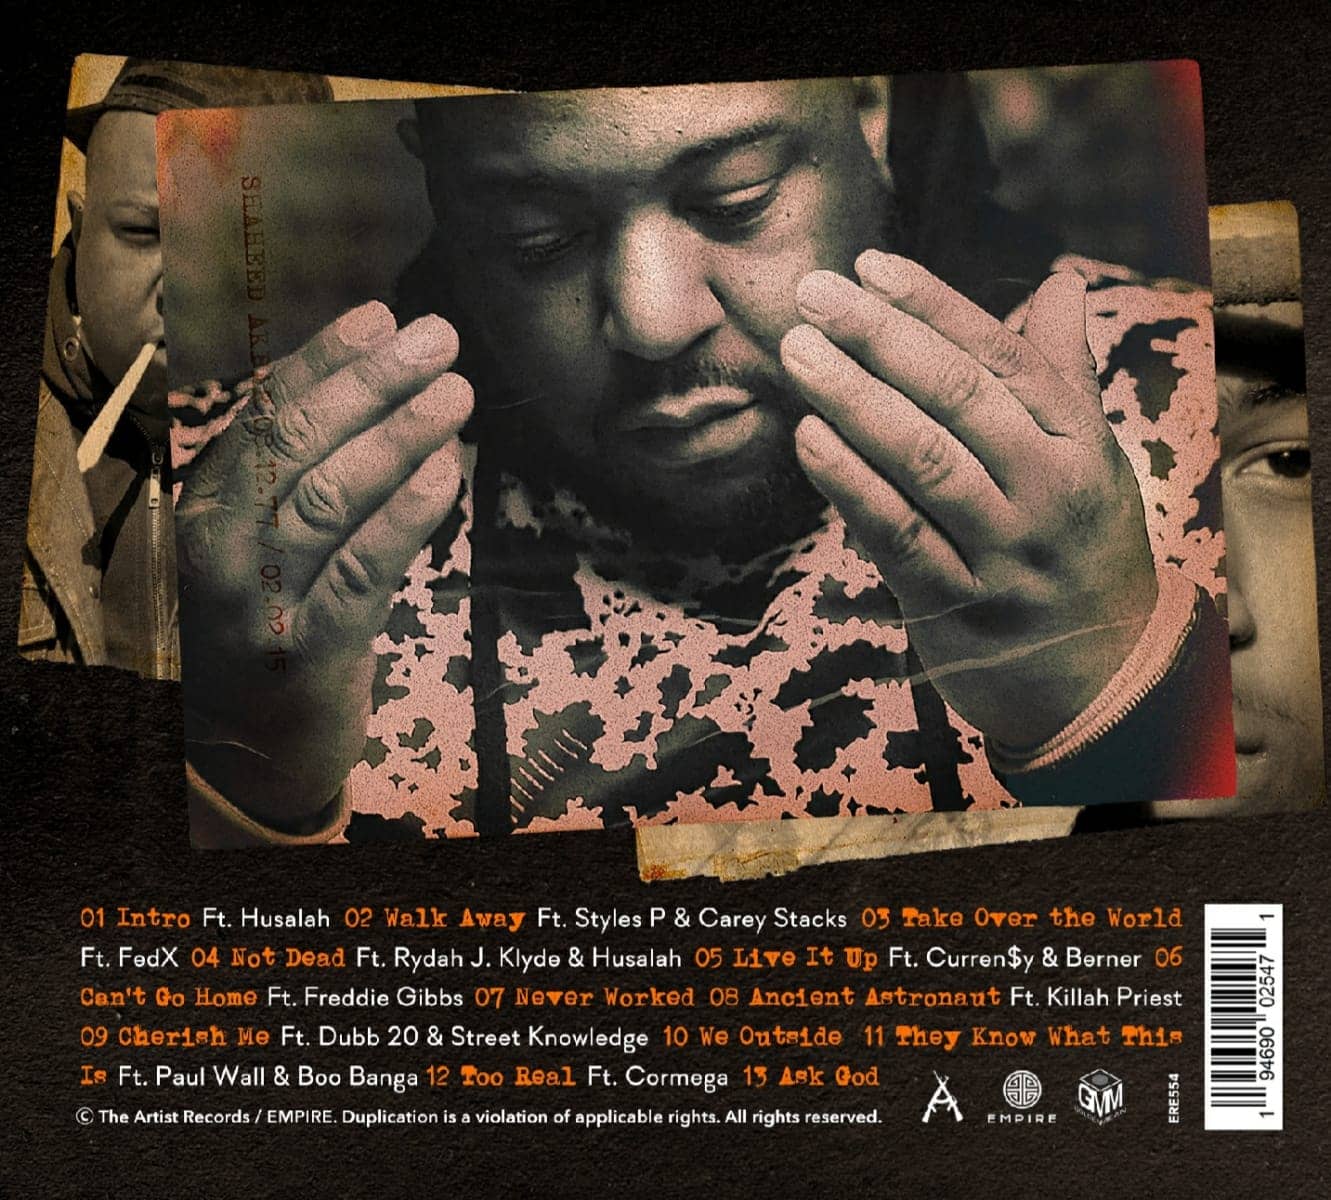 The-Jacka-Murder-Weapon-CD-cover-back, Manager PK discusses the Jacka’s new album, ‘Murder Weapon’, Culture Currents 